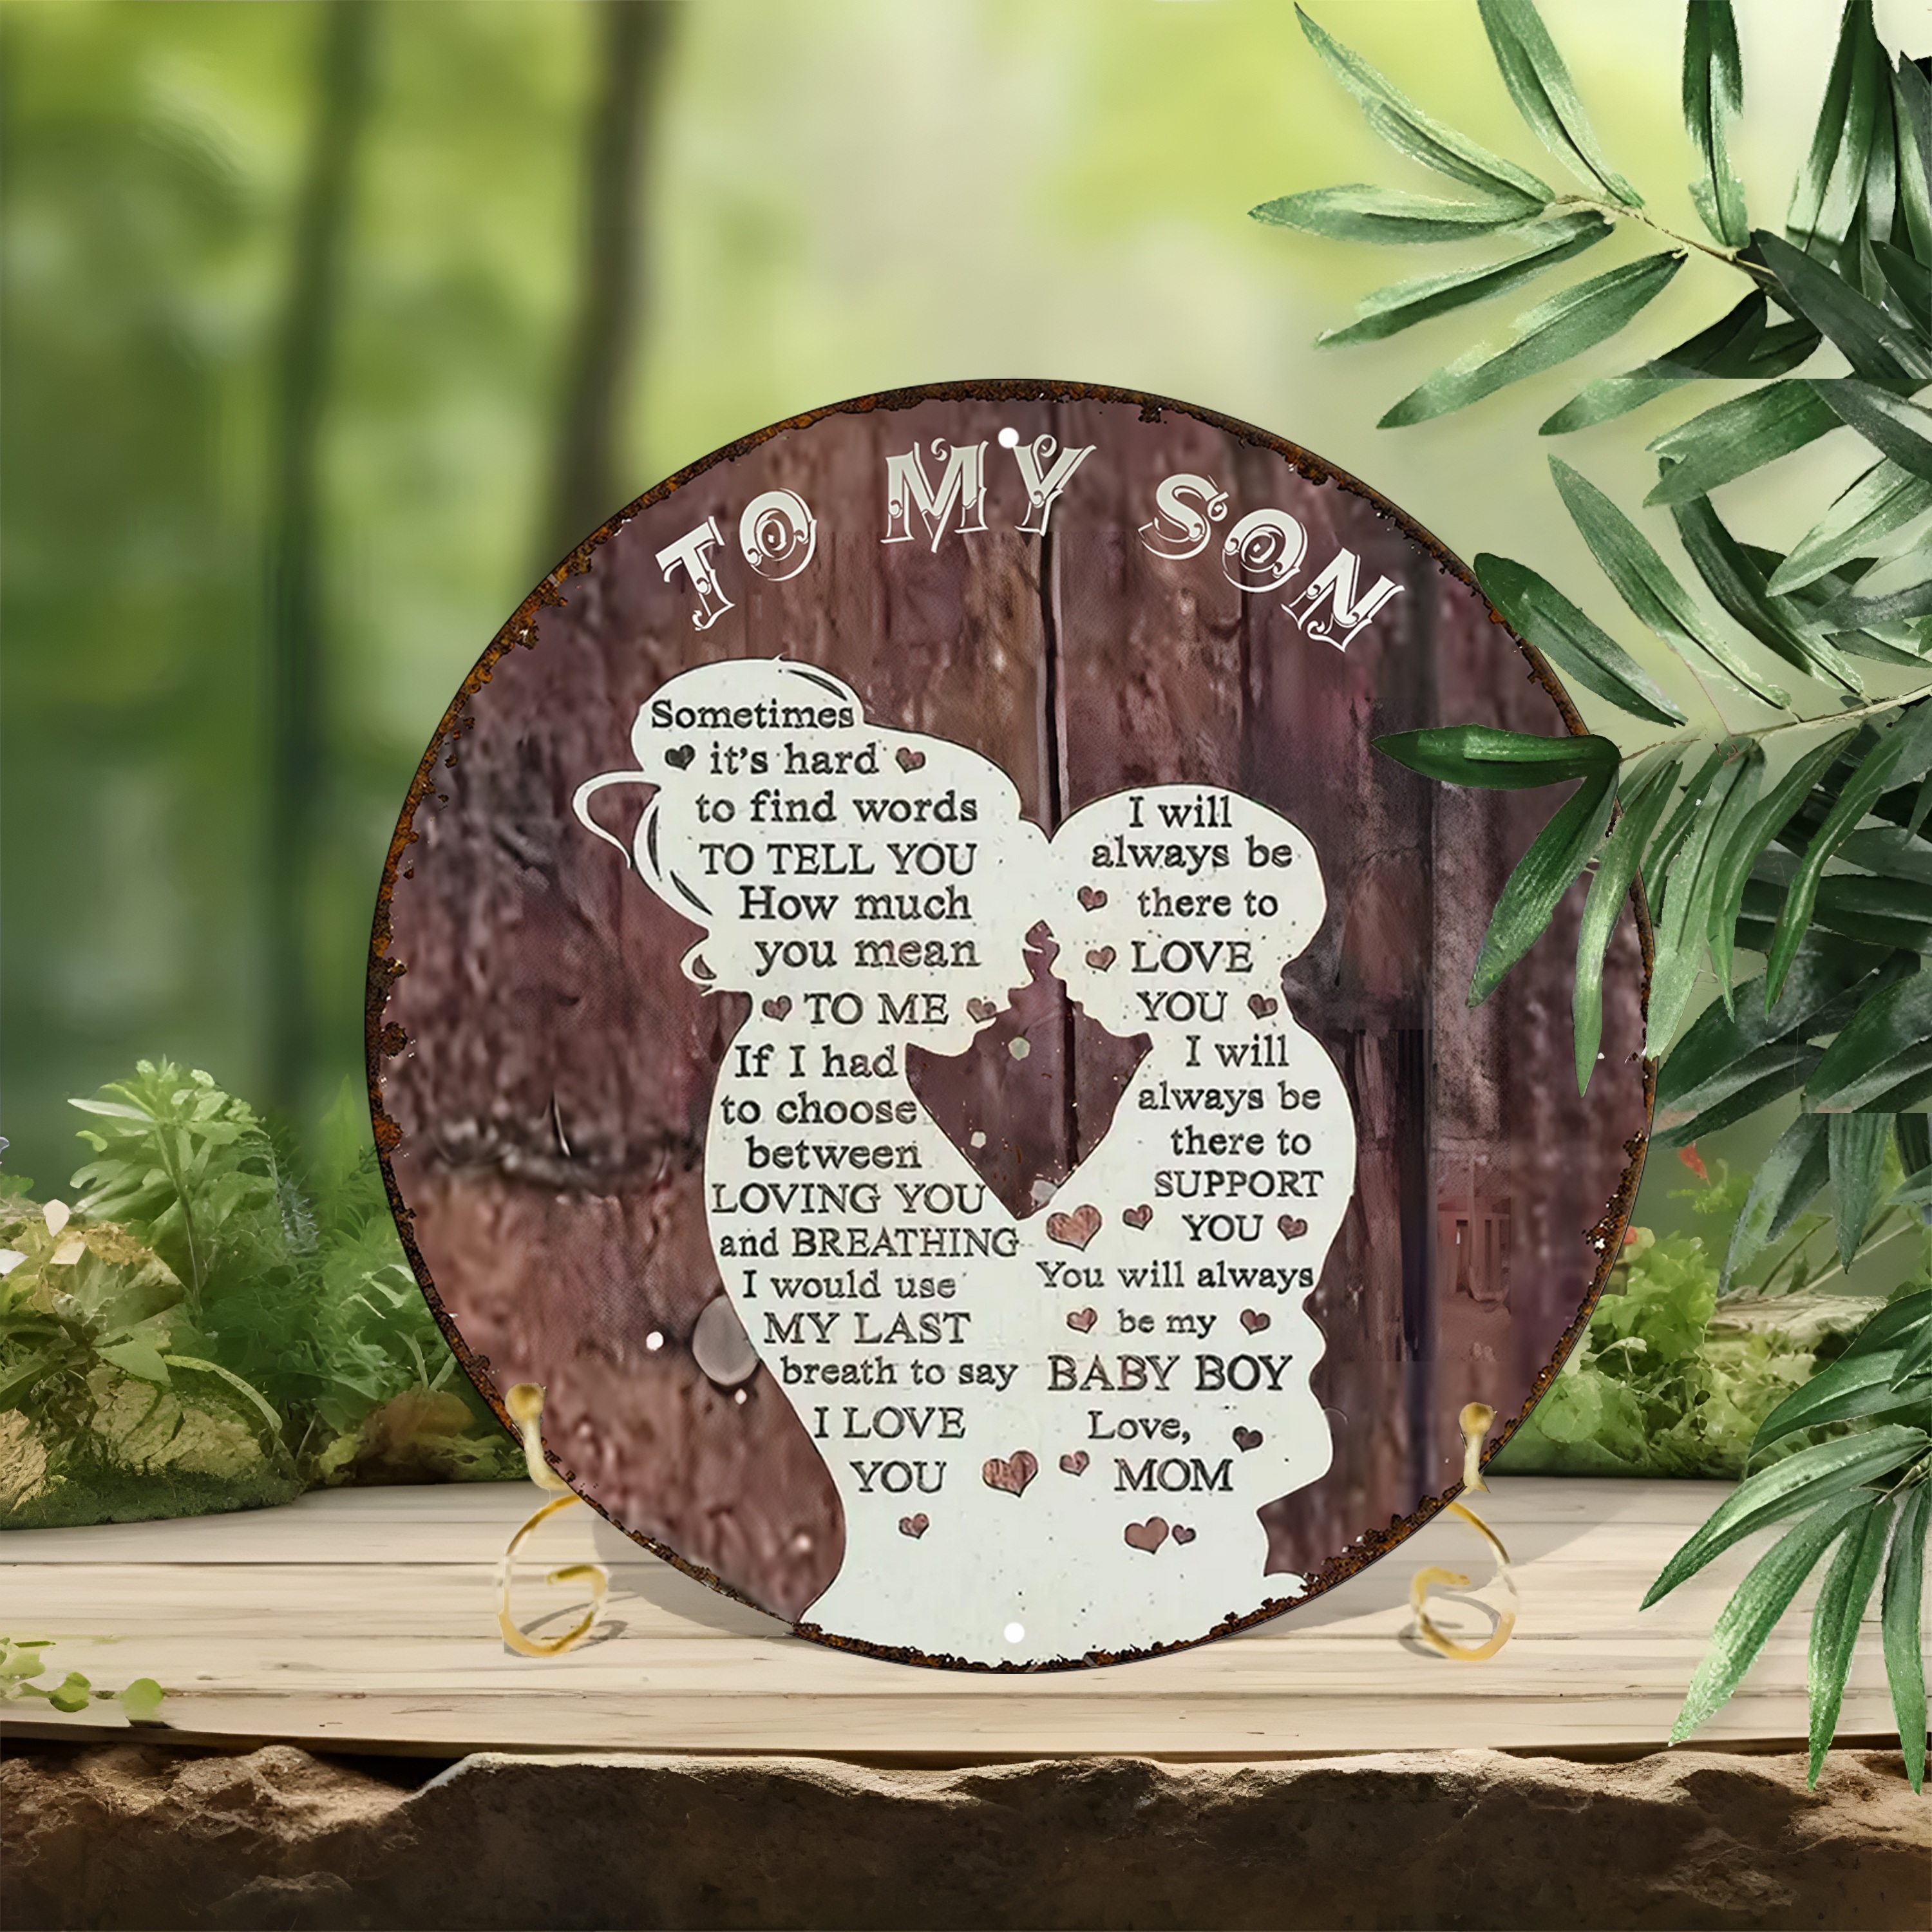 

1pc To My Son Fun Round Aluminum Sign, I Love You, I Will Always Be There To Love You, Be There To Support You, You Will Always Be My Baby, Boy, Love Mom, Birthday Gift, 8x8in Eid Al-adha Mubarak